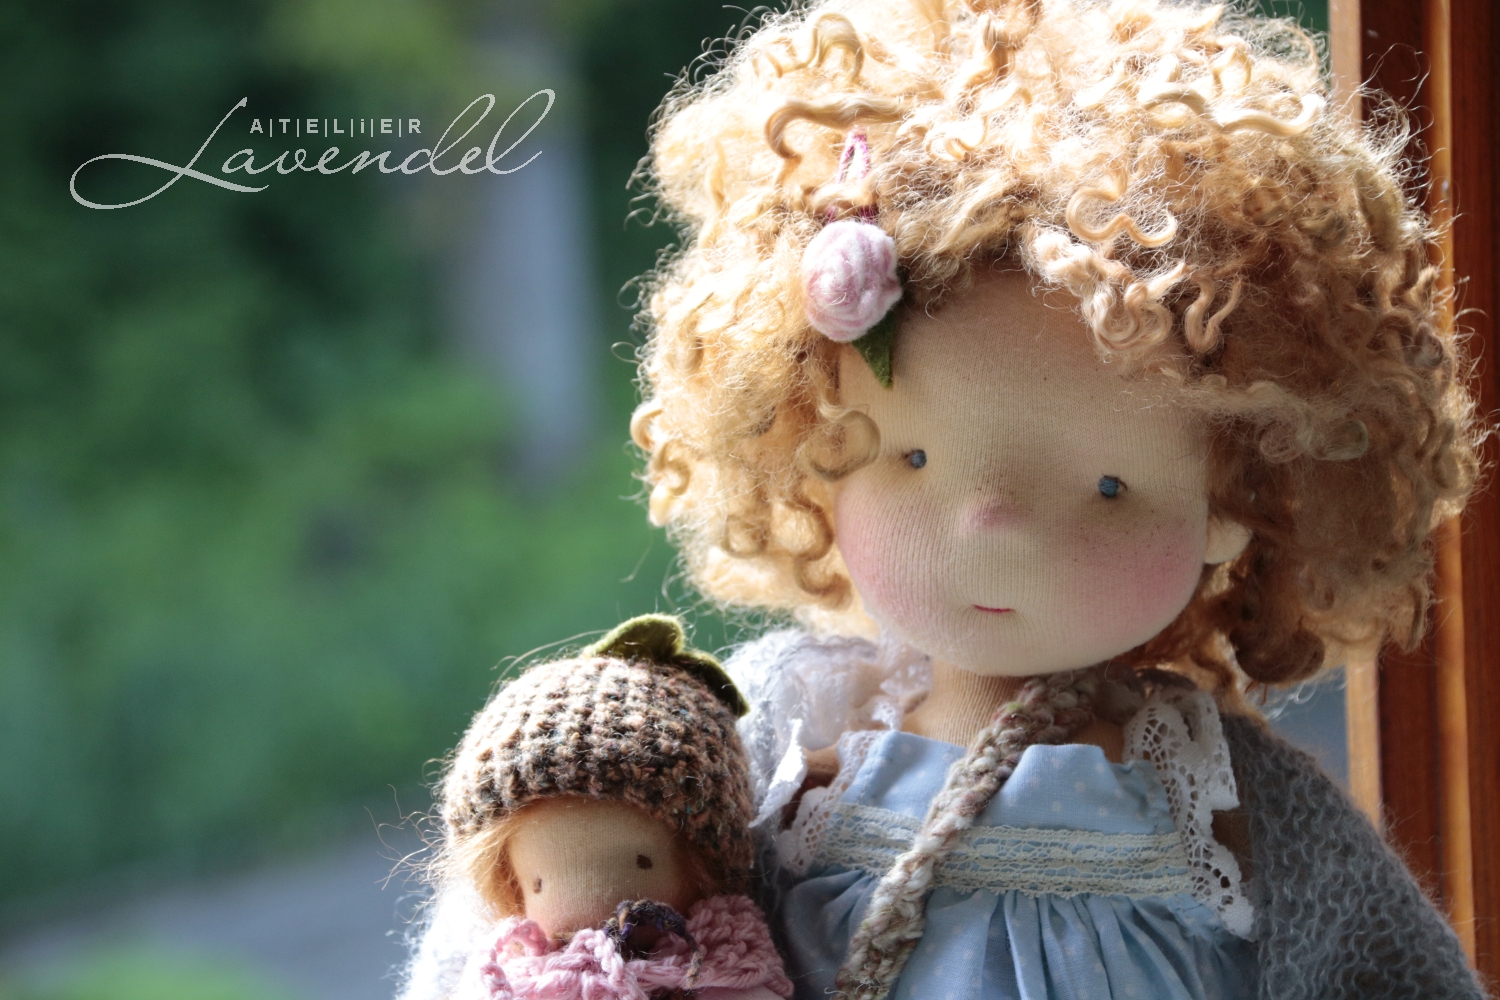 Natural fiber art doll ooak by Atelier Lavendel: meet Ariane and Luca. Organic, best quality materials, many sweet details, heirloom quality. Handmade in Germany